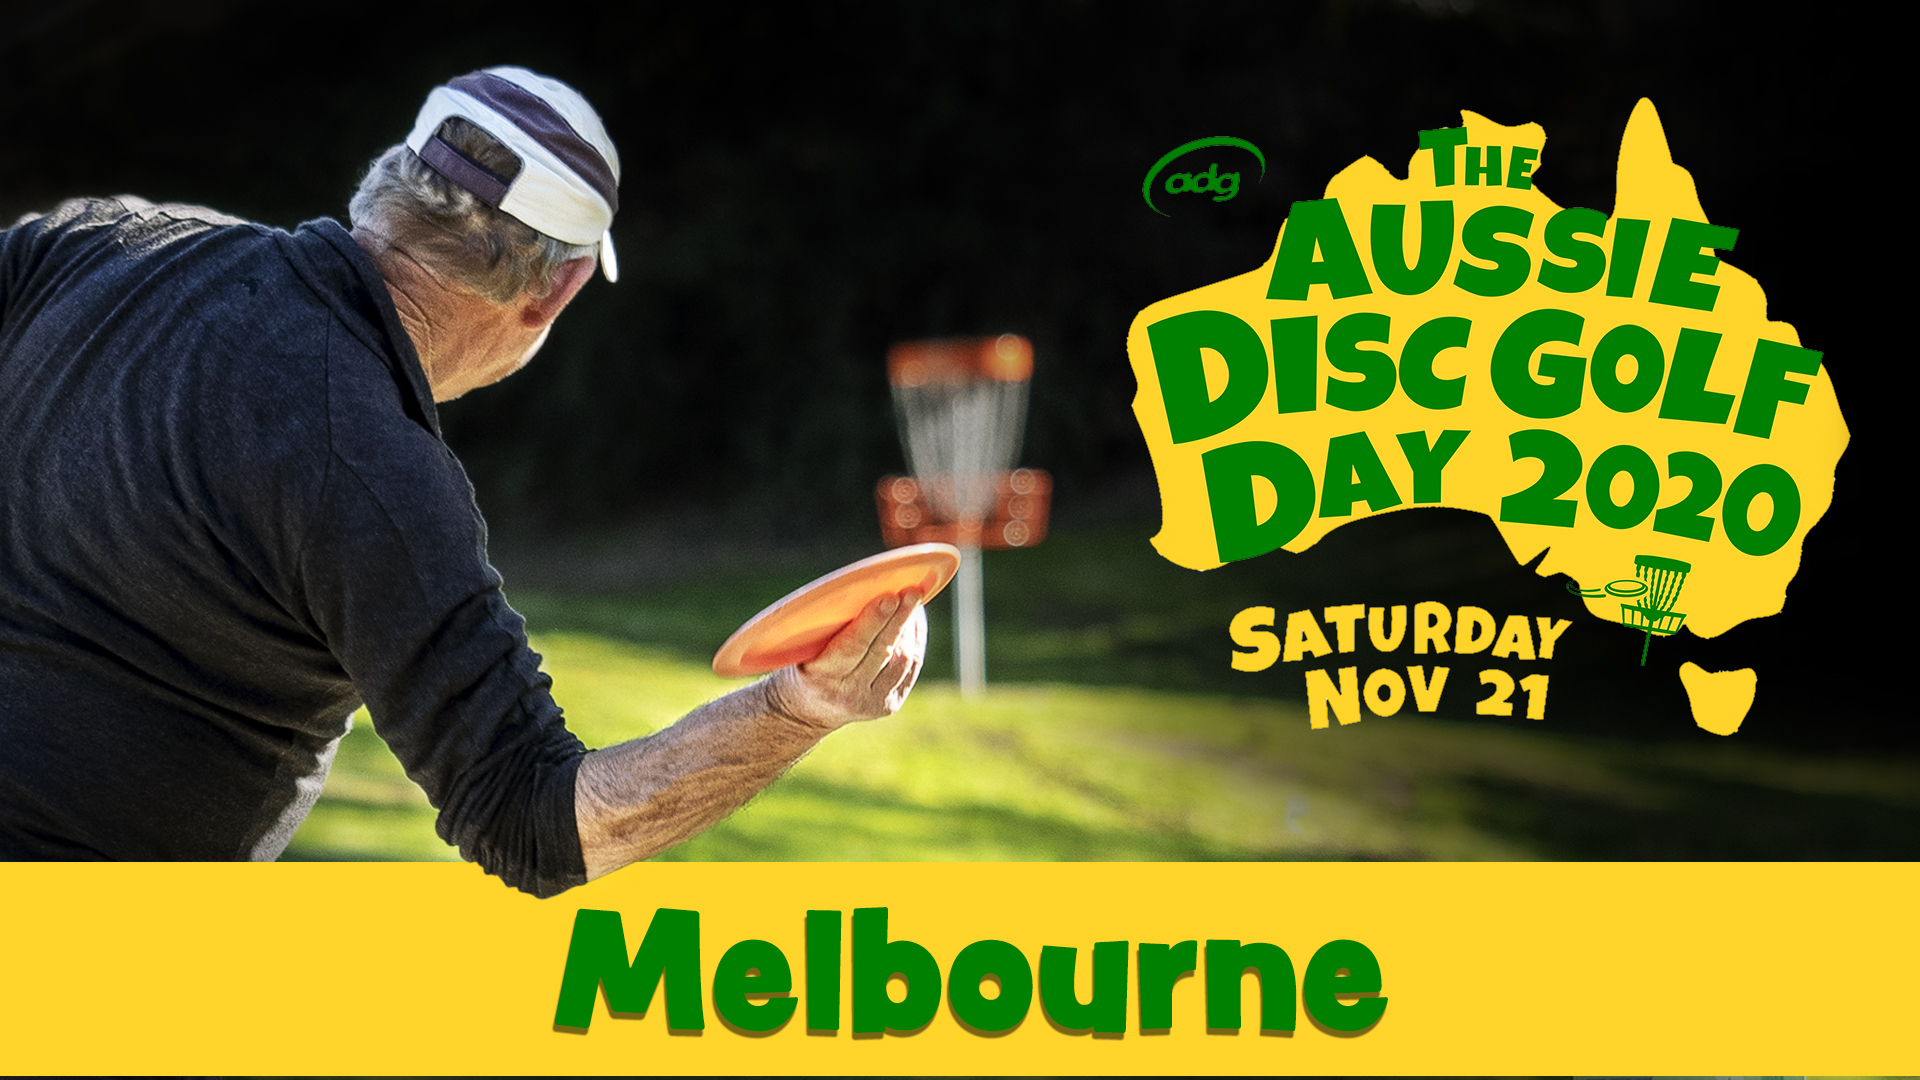 The Aussie Disc Golf Day FB cover photo Melbourne